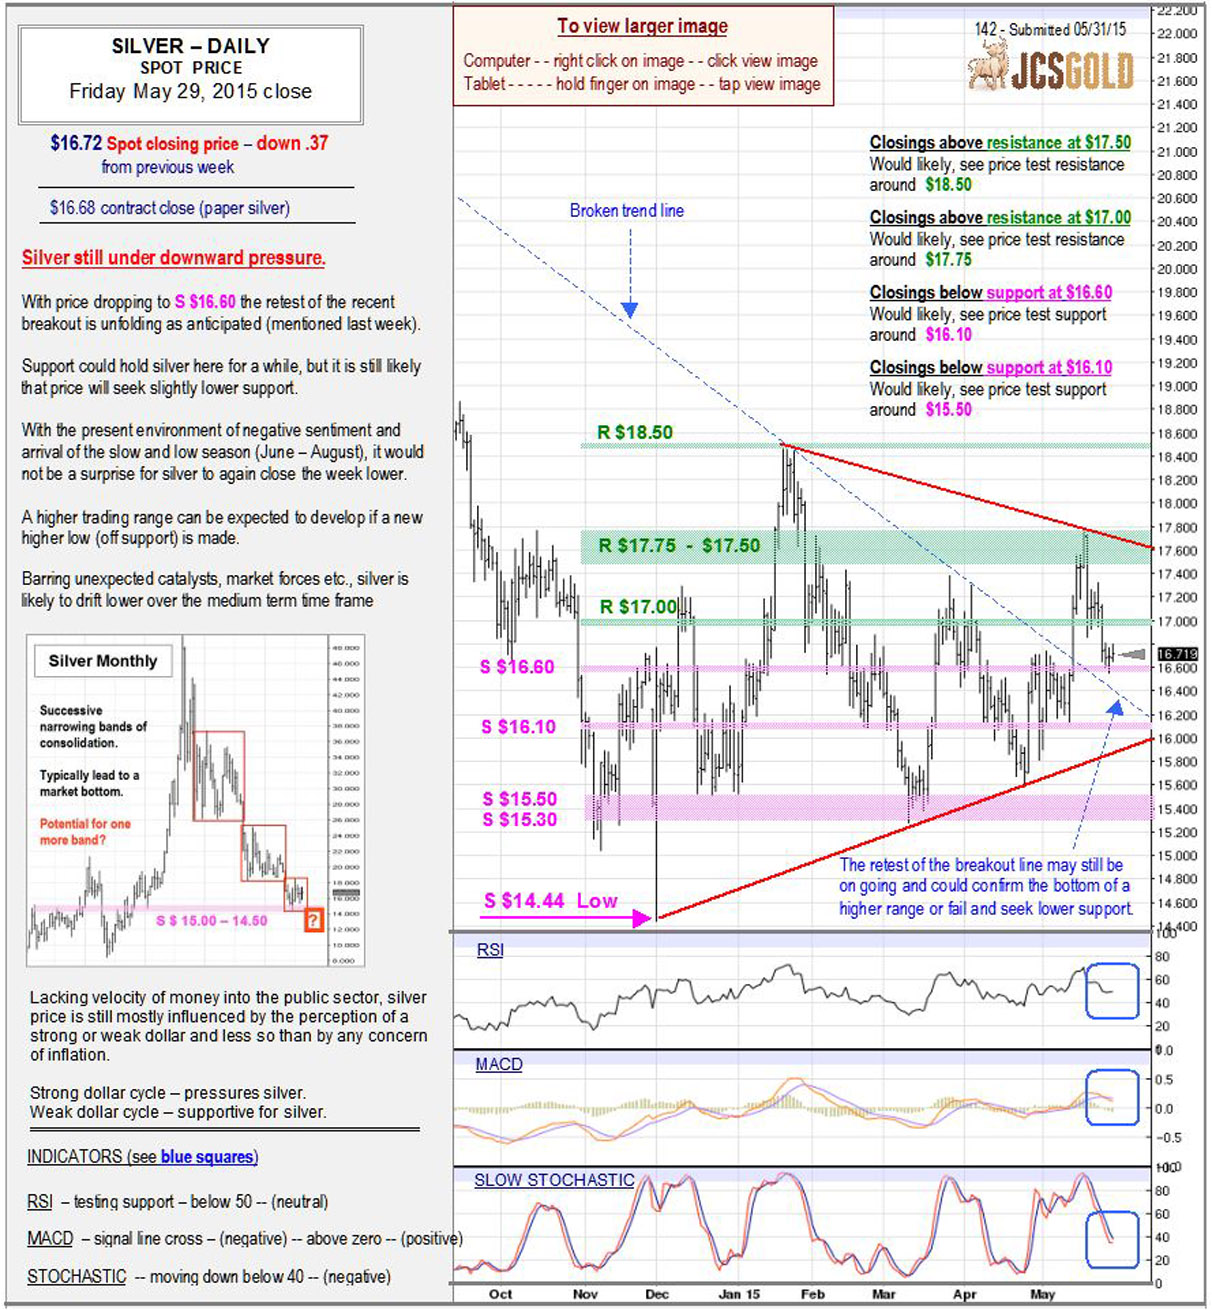 May 29, 2015 chart & commentary